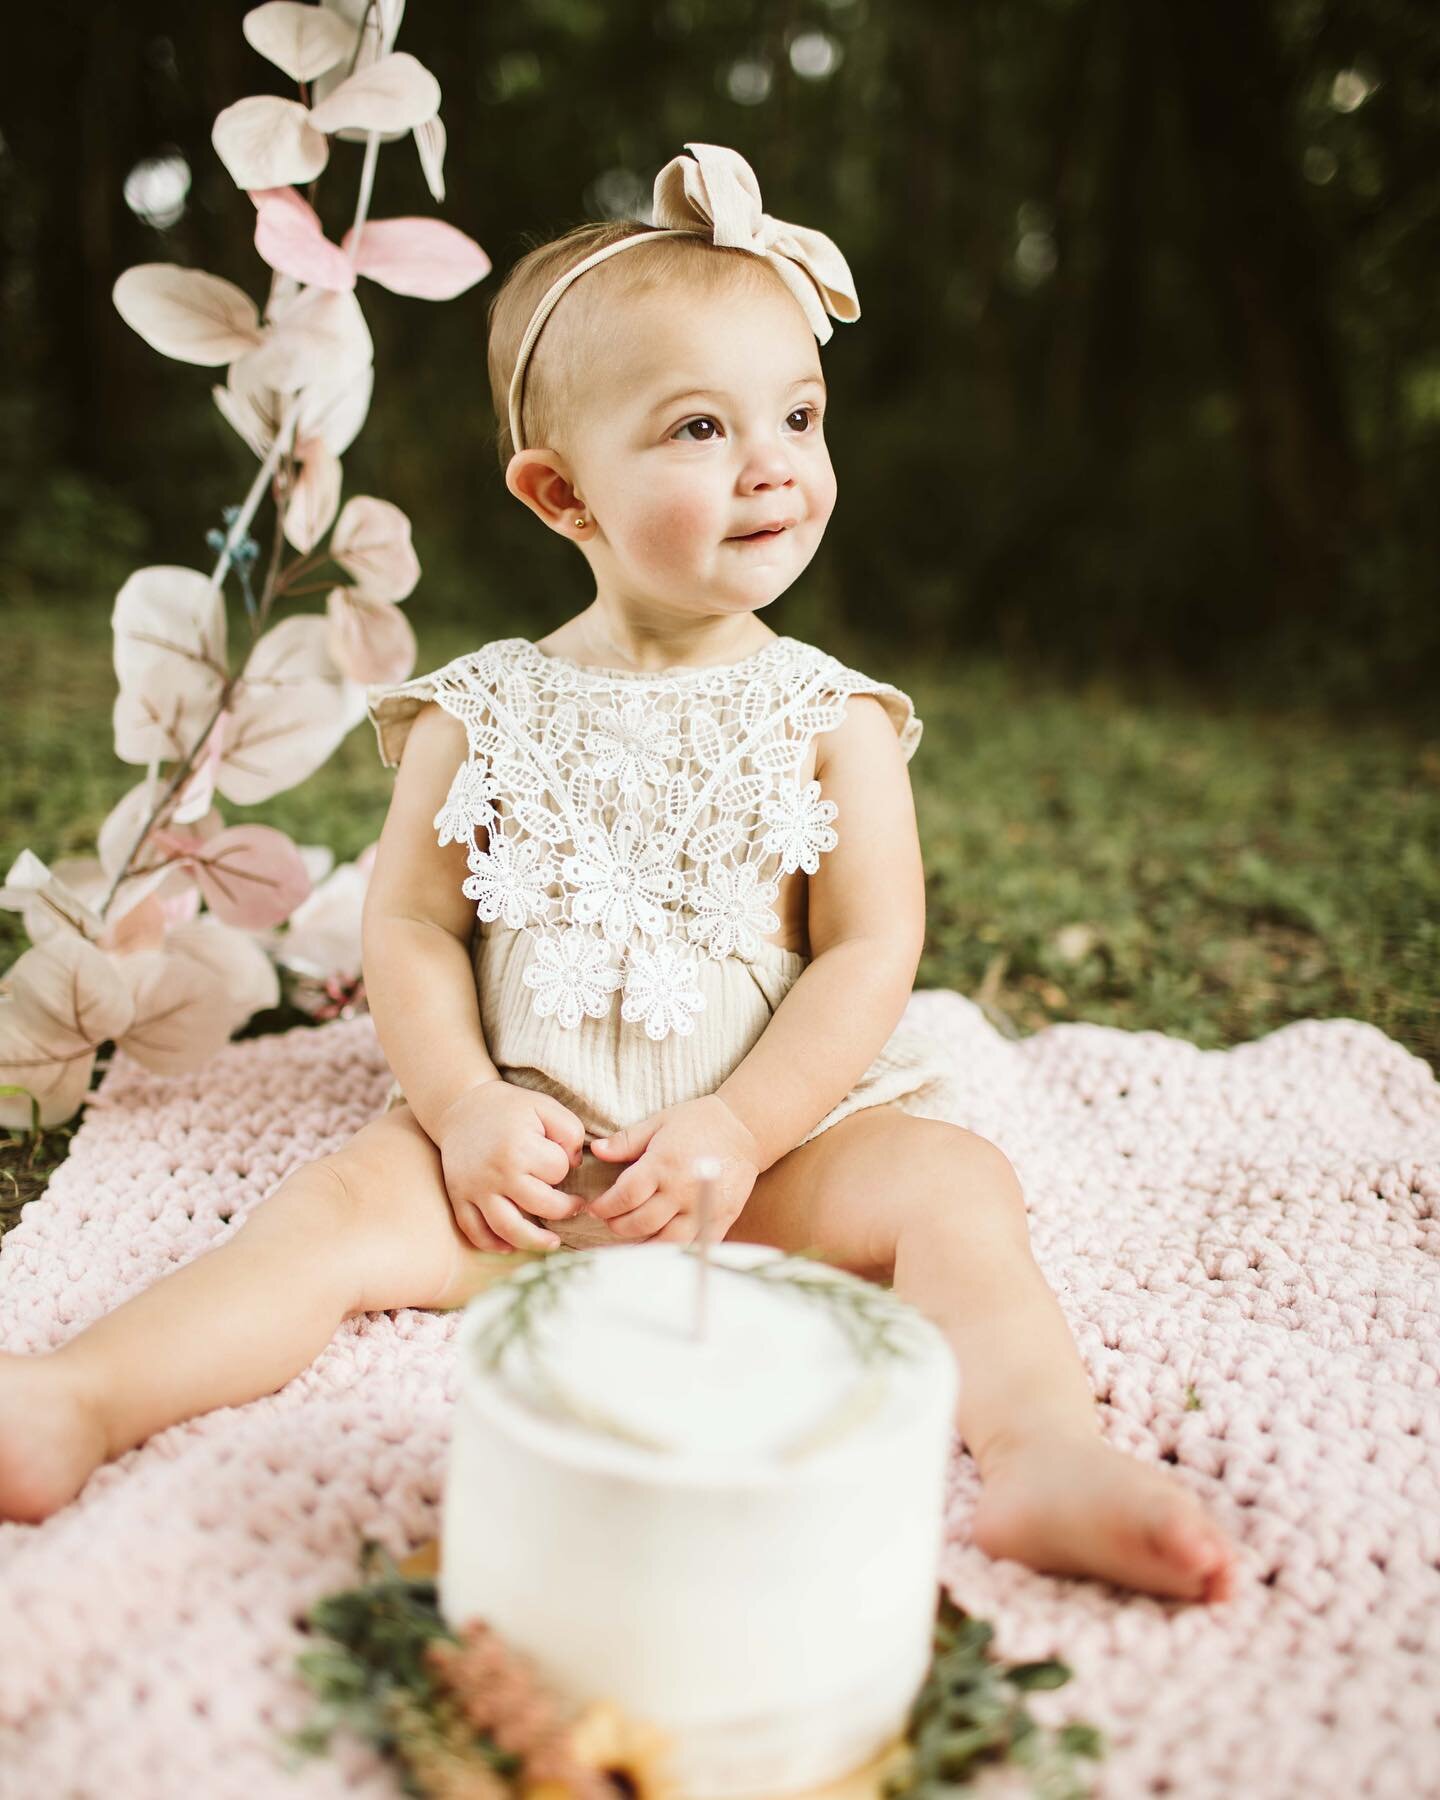 This cuties milestone photos just get sweeter every session!